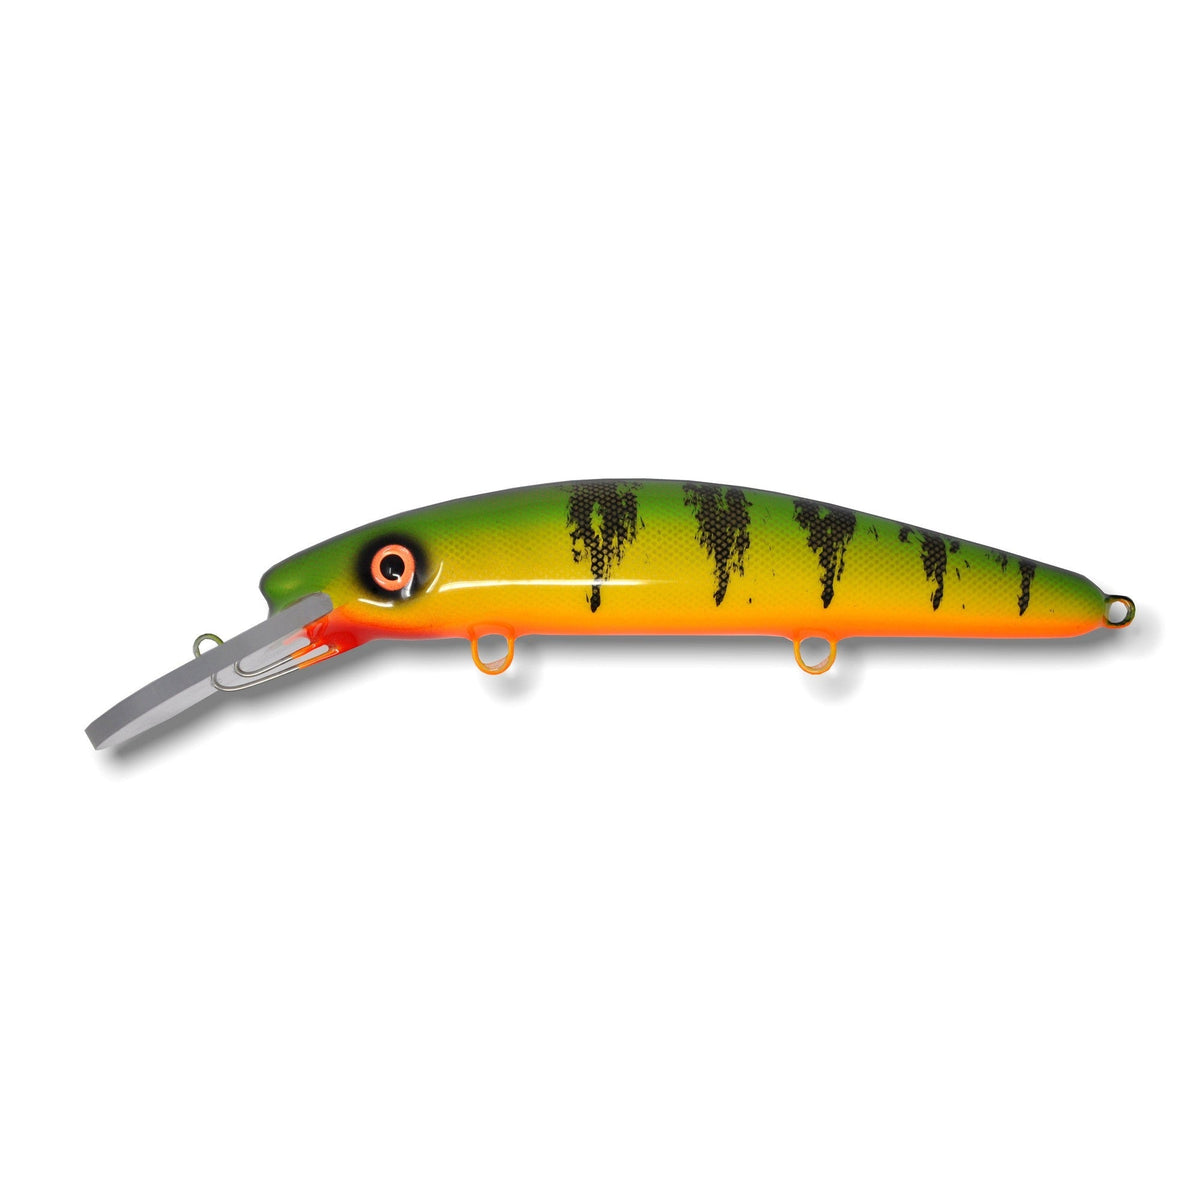 View of Crankbaits Blue Water Baits 9" Herring - Dive Crankbaits available at EZOKO Pike and Musky Shop